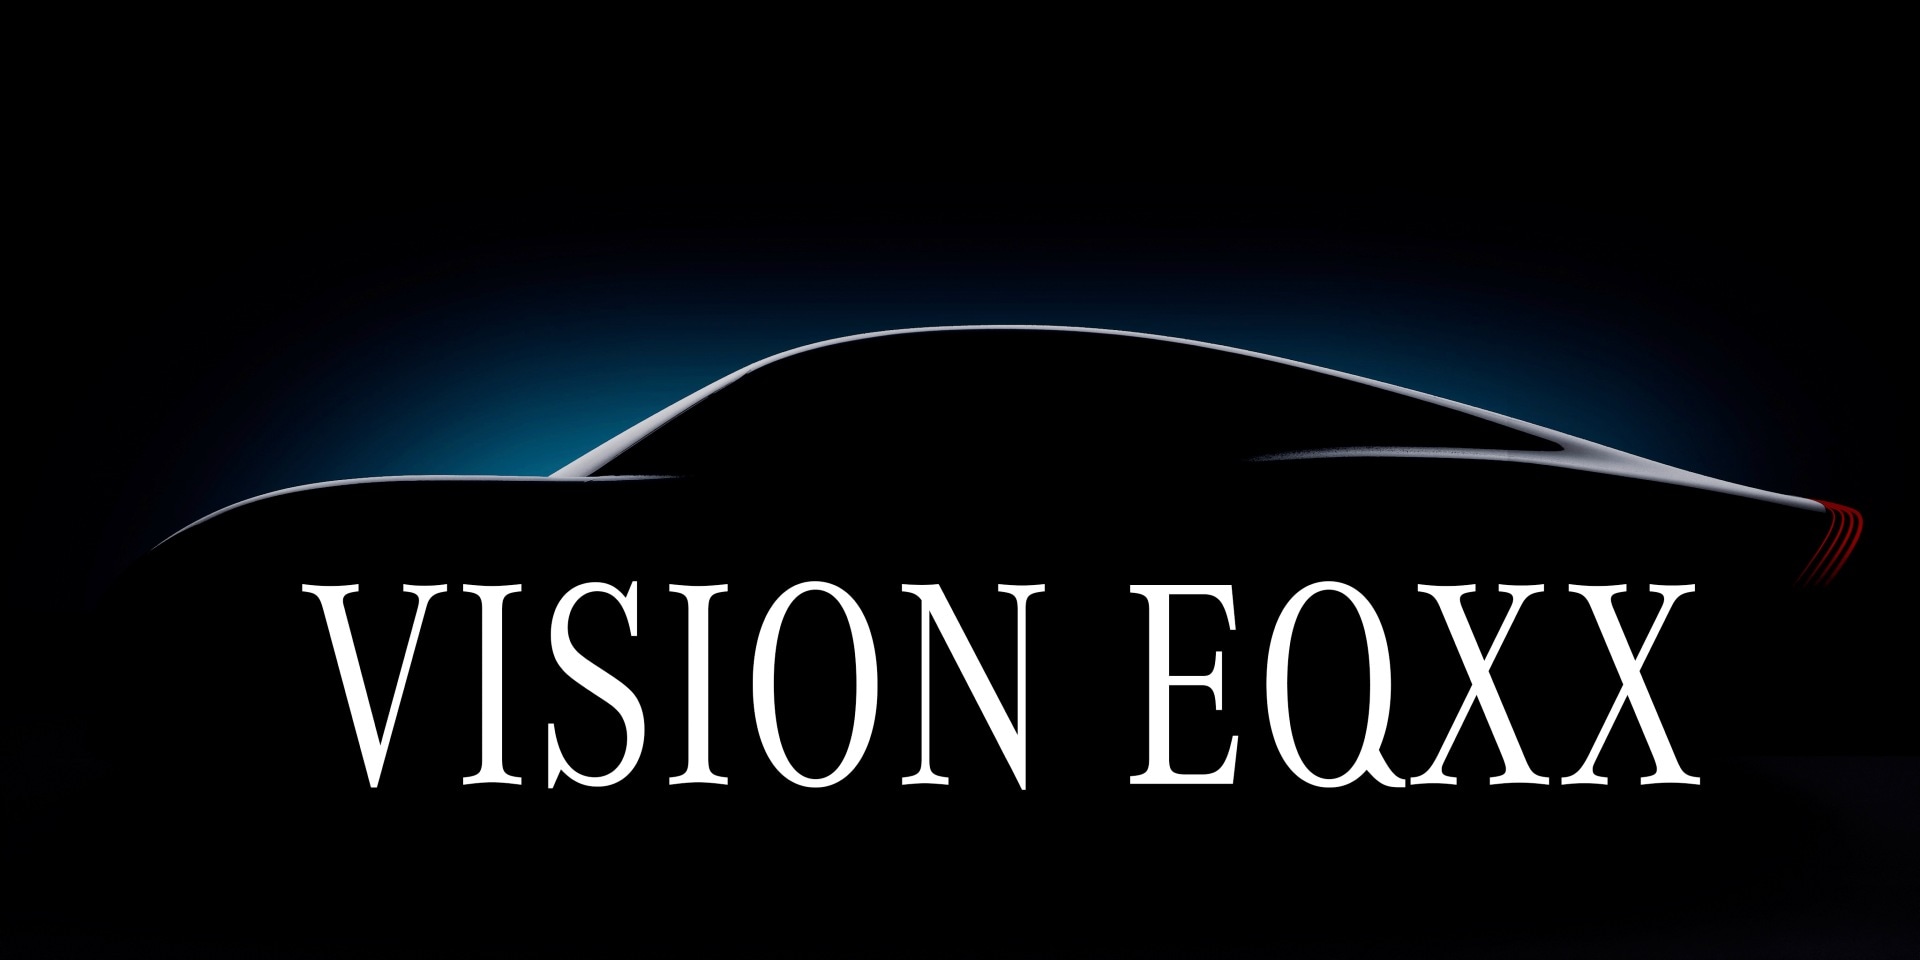 The Mercedes-Benz Vision EQXX will have a targeted real-world range of 1,000 km. Image: Mercedes-Benz